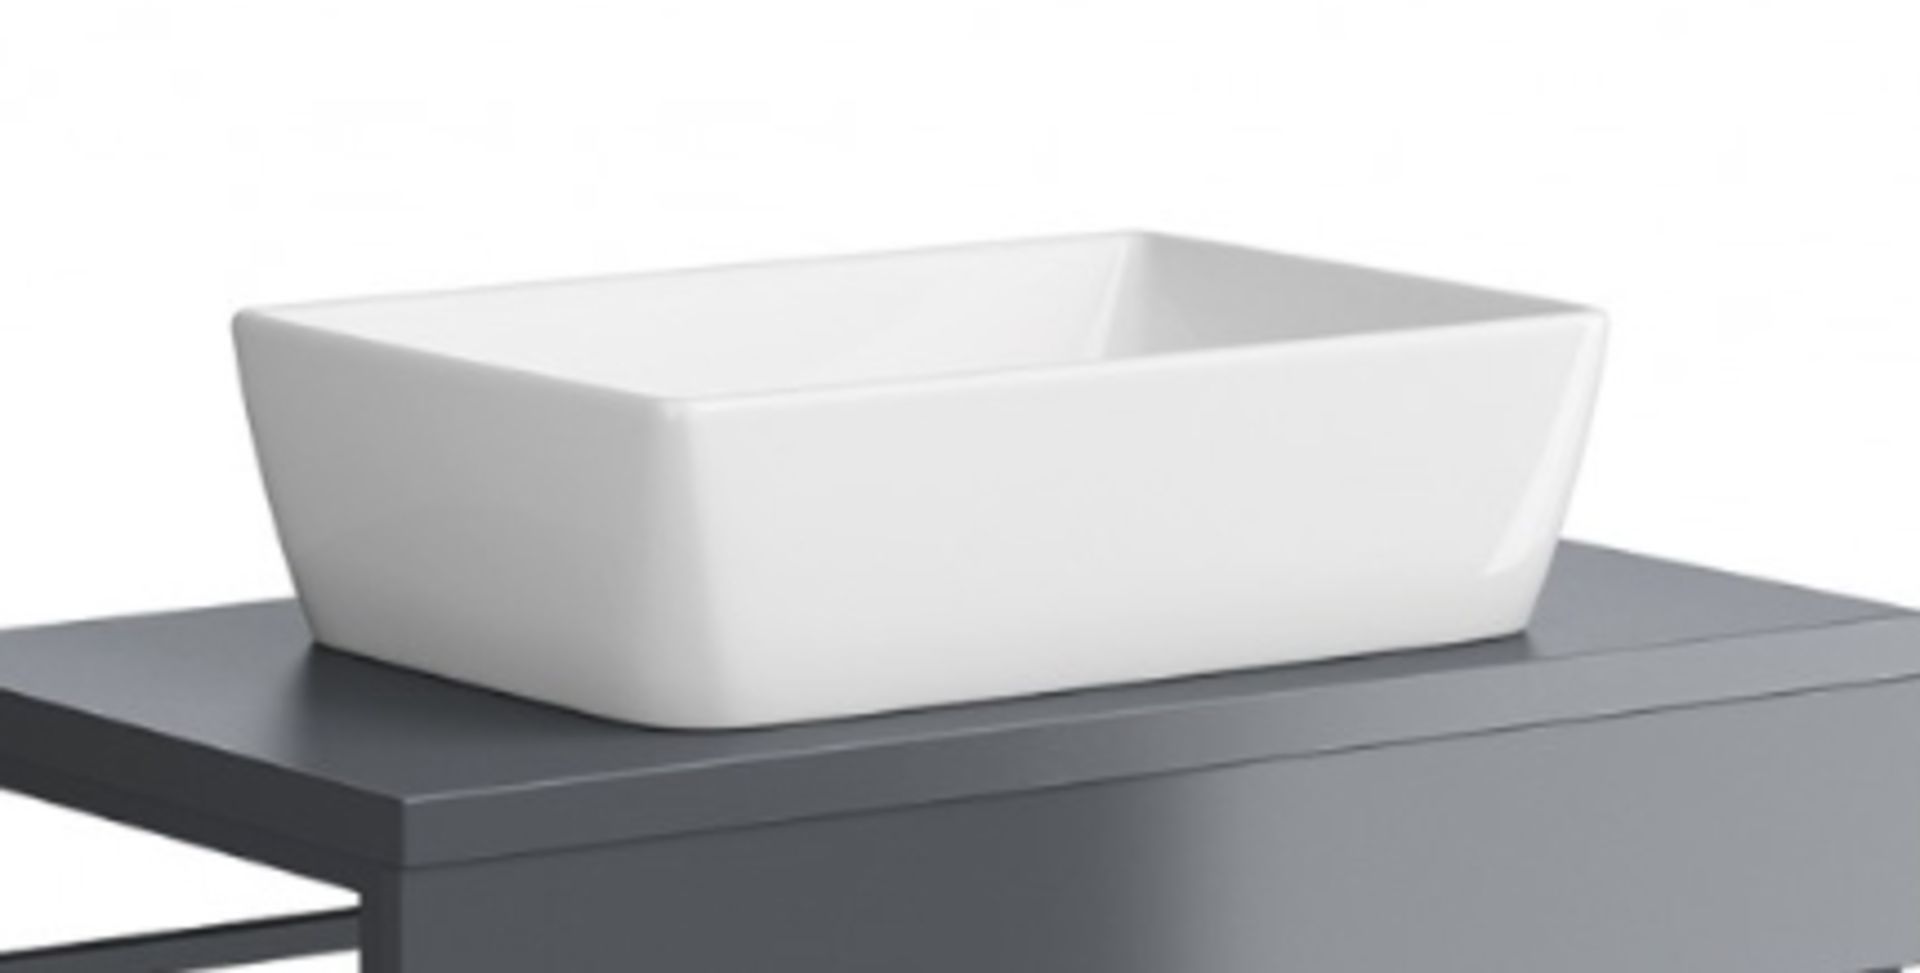 1 x Synergy Berg Countertop Ceramic 600mm Wash Basin With Free Flow Waste - New Stock - RRP £133 - Image 5 of 6